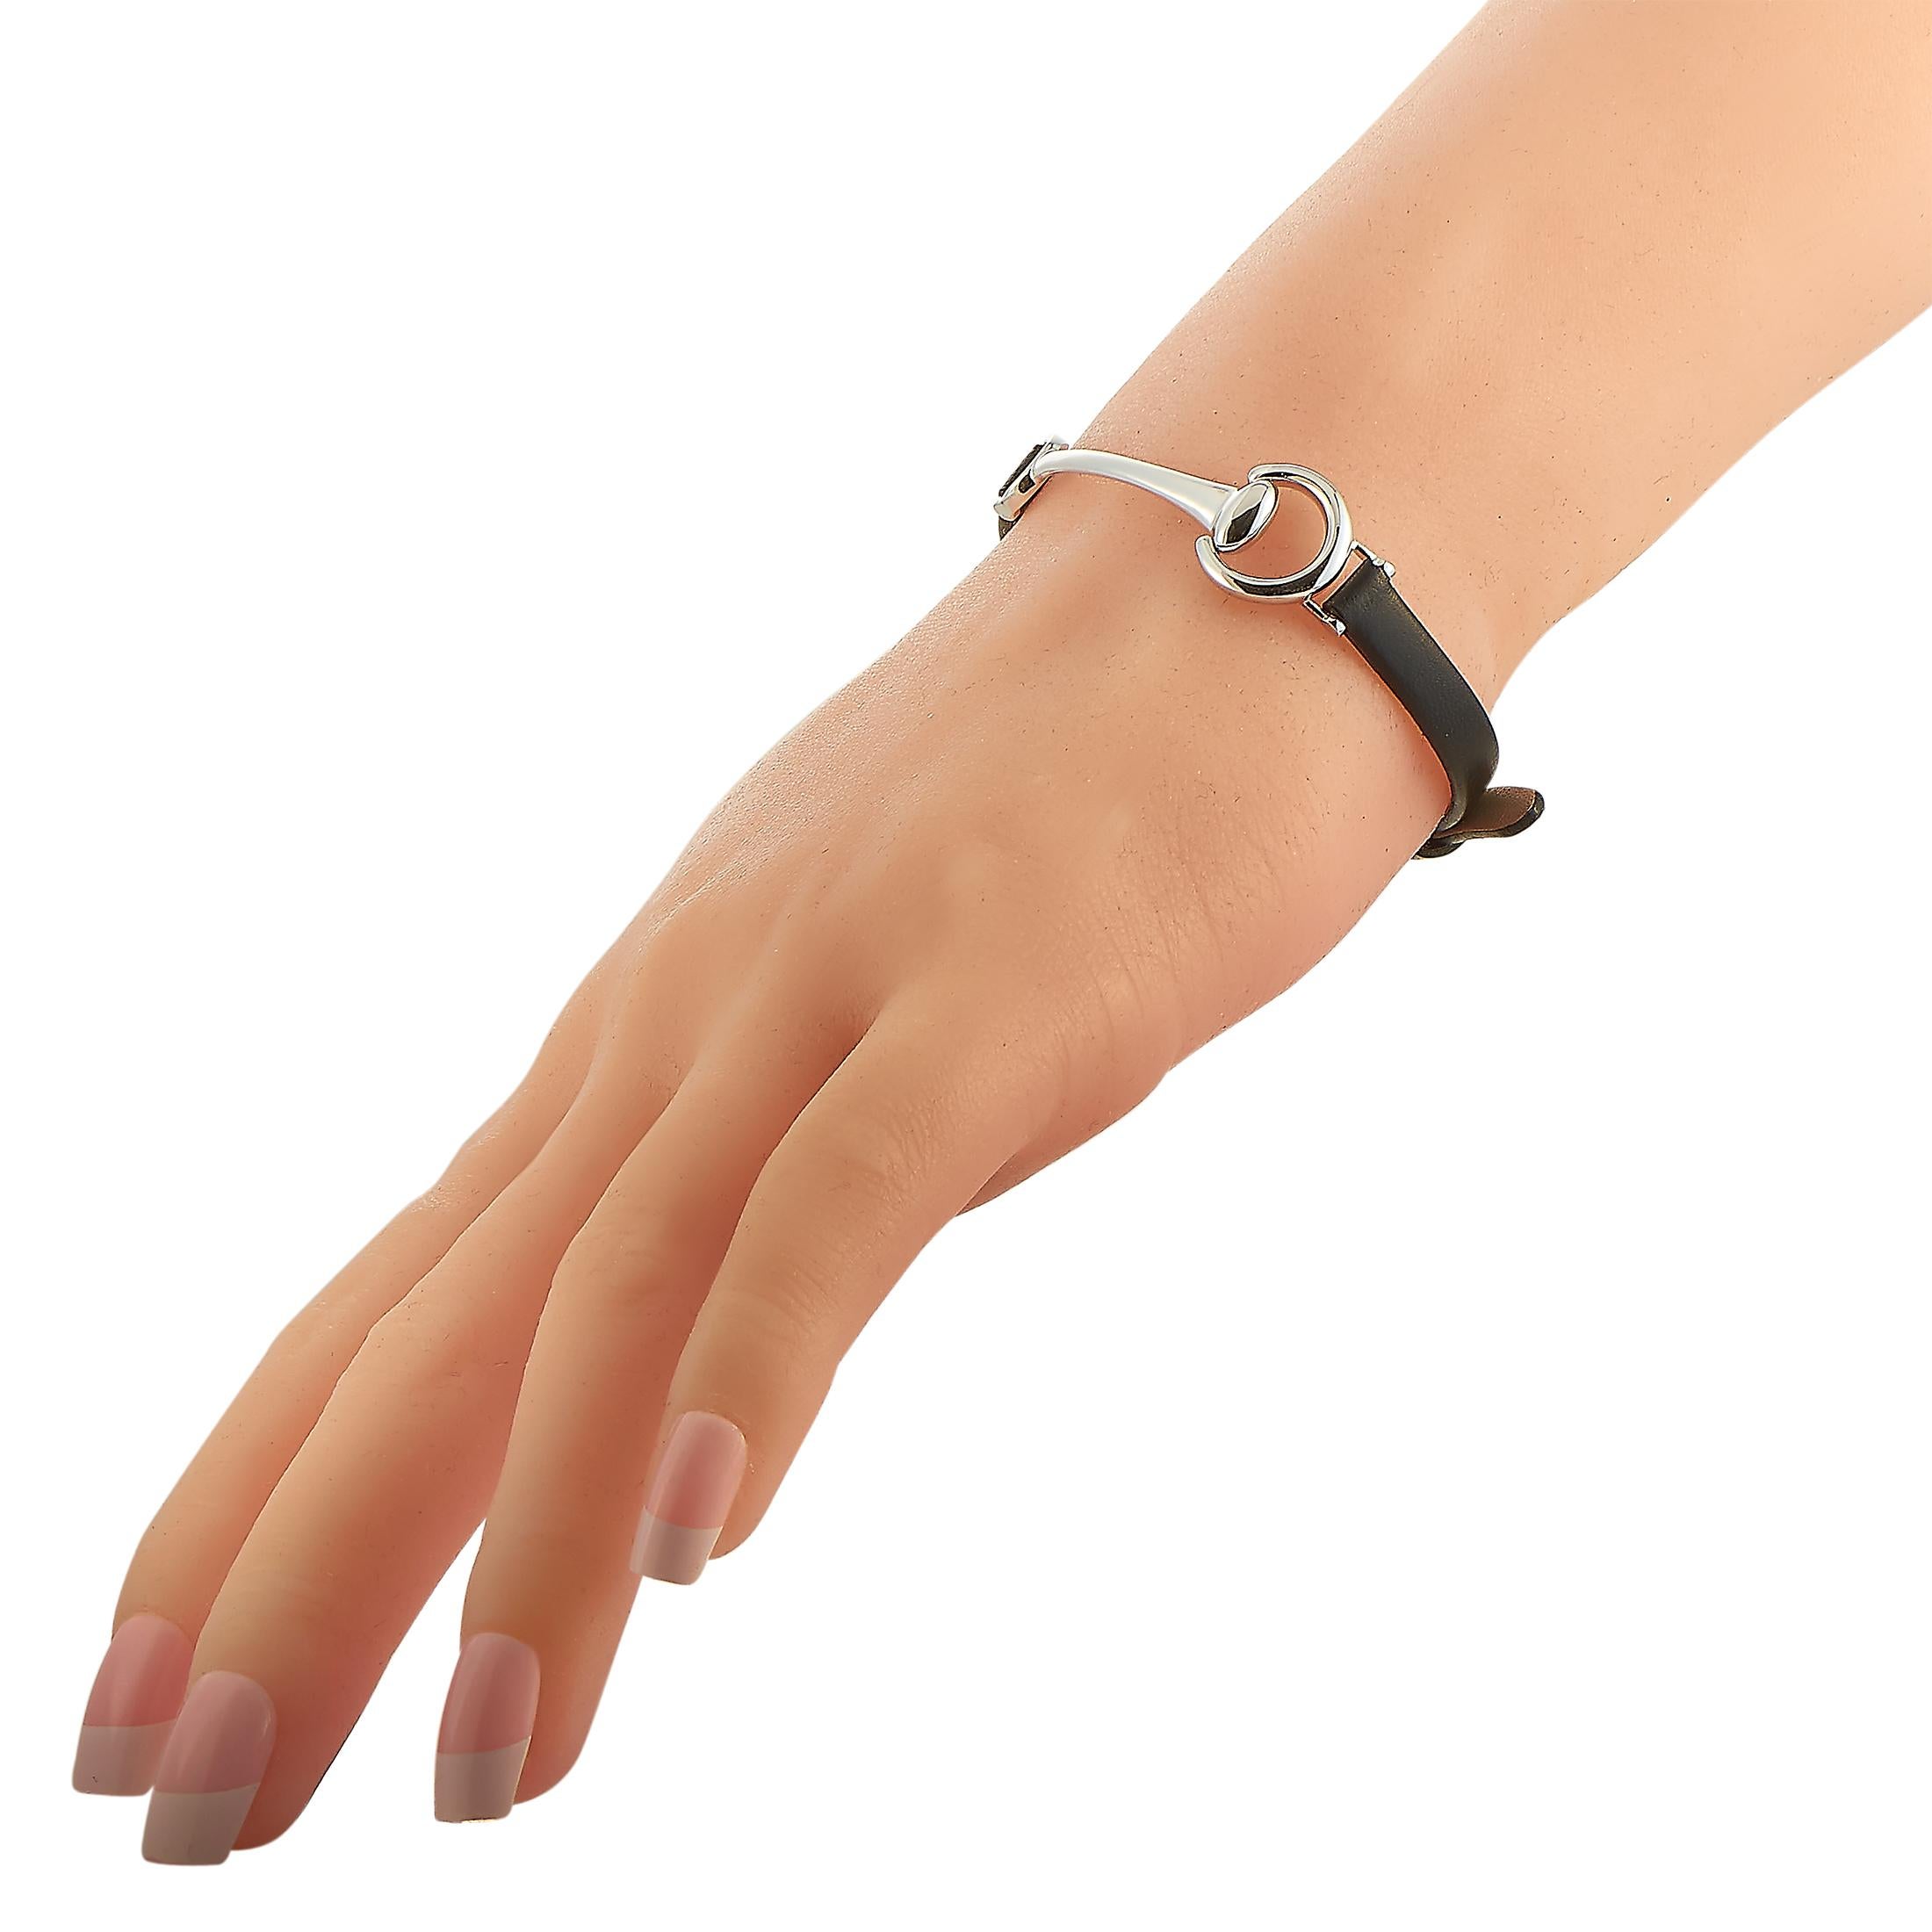 This Ubaldi bracelet is made out of 18K white gold and black leather and weighs 8.1 grams, measuring 8.50” in length.

The bracelet is offered in brand new condition and includes a gift box.